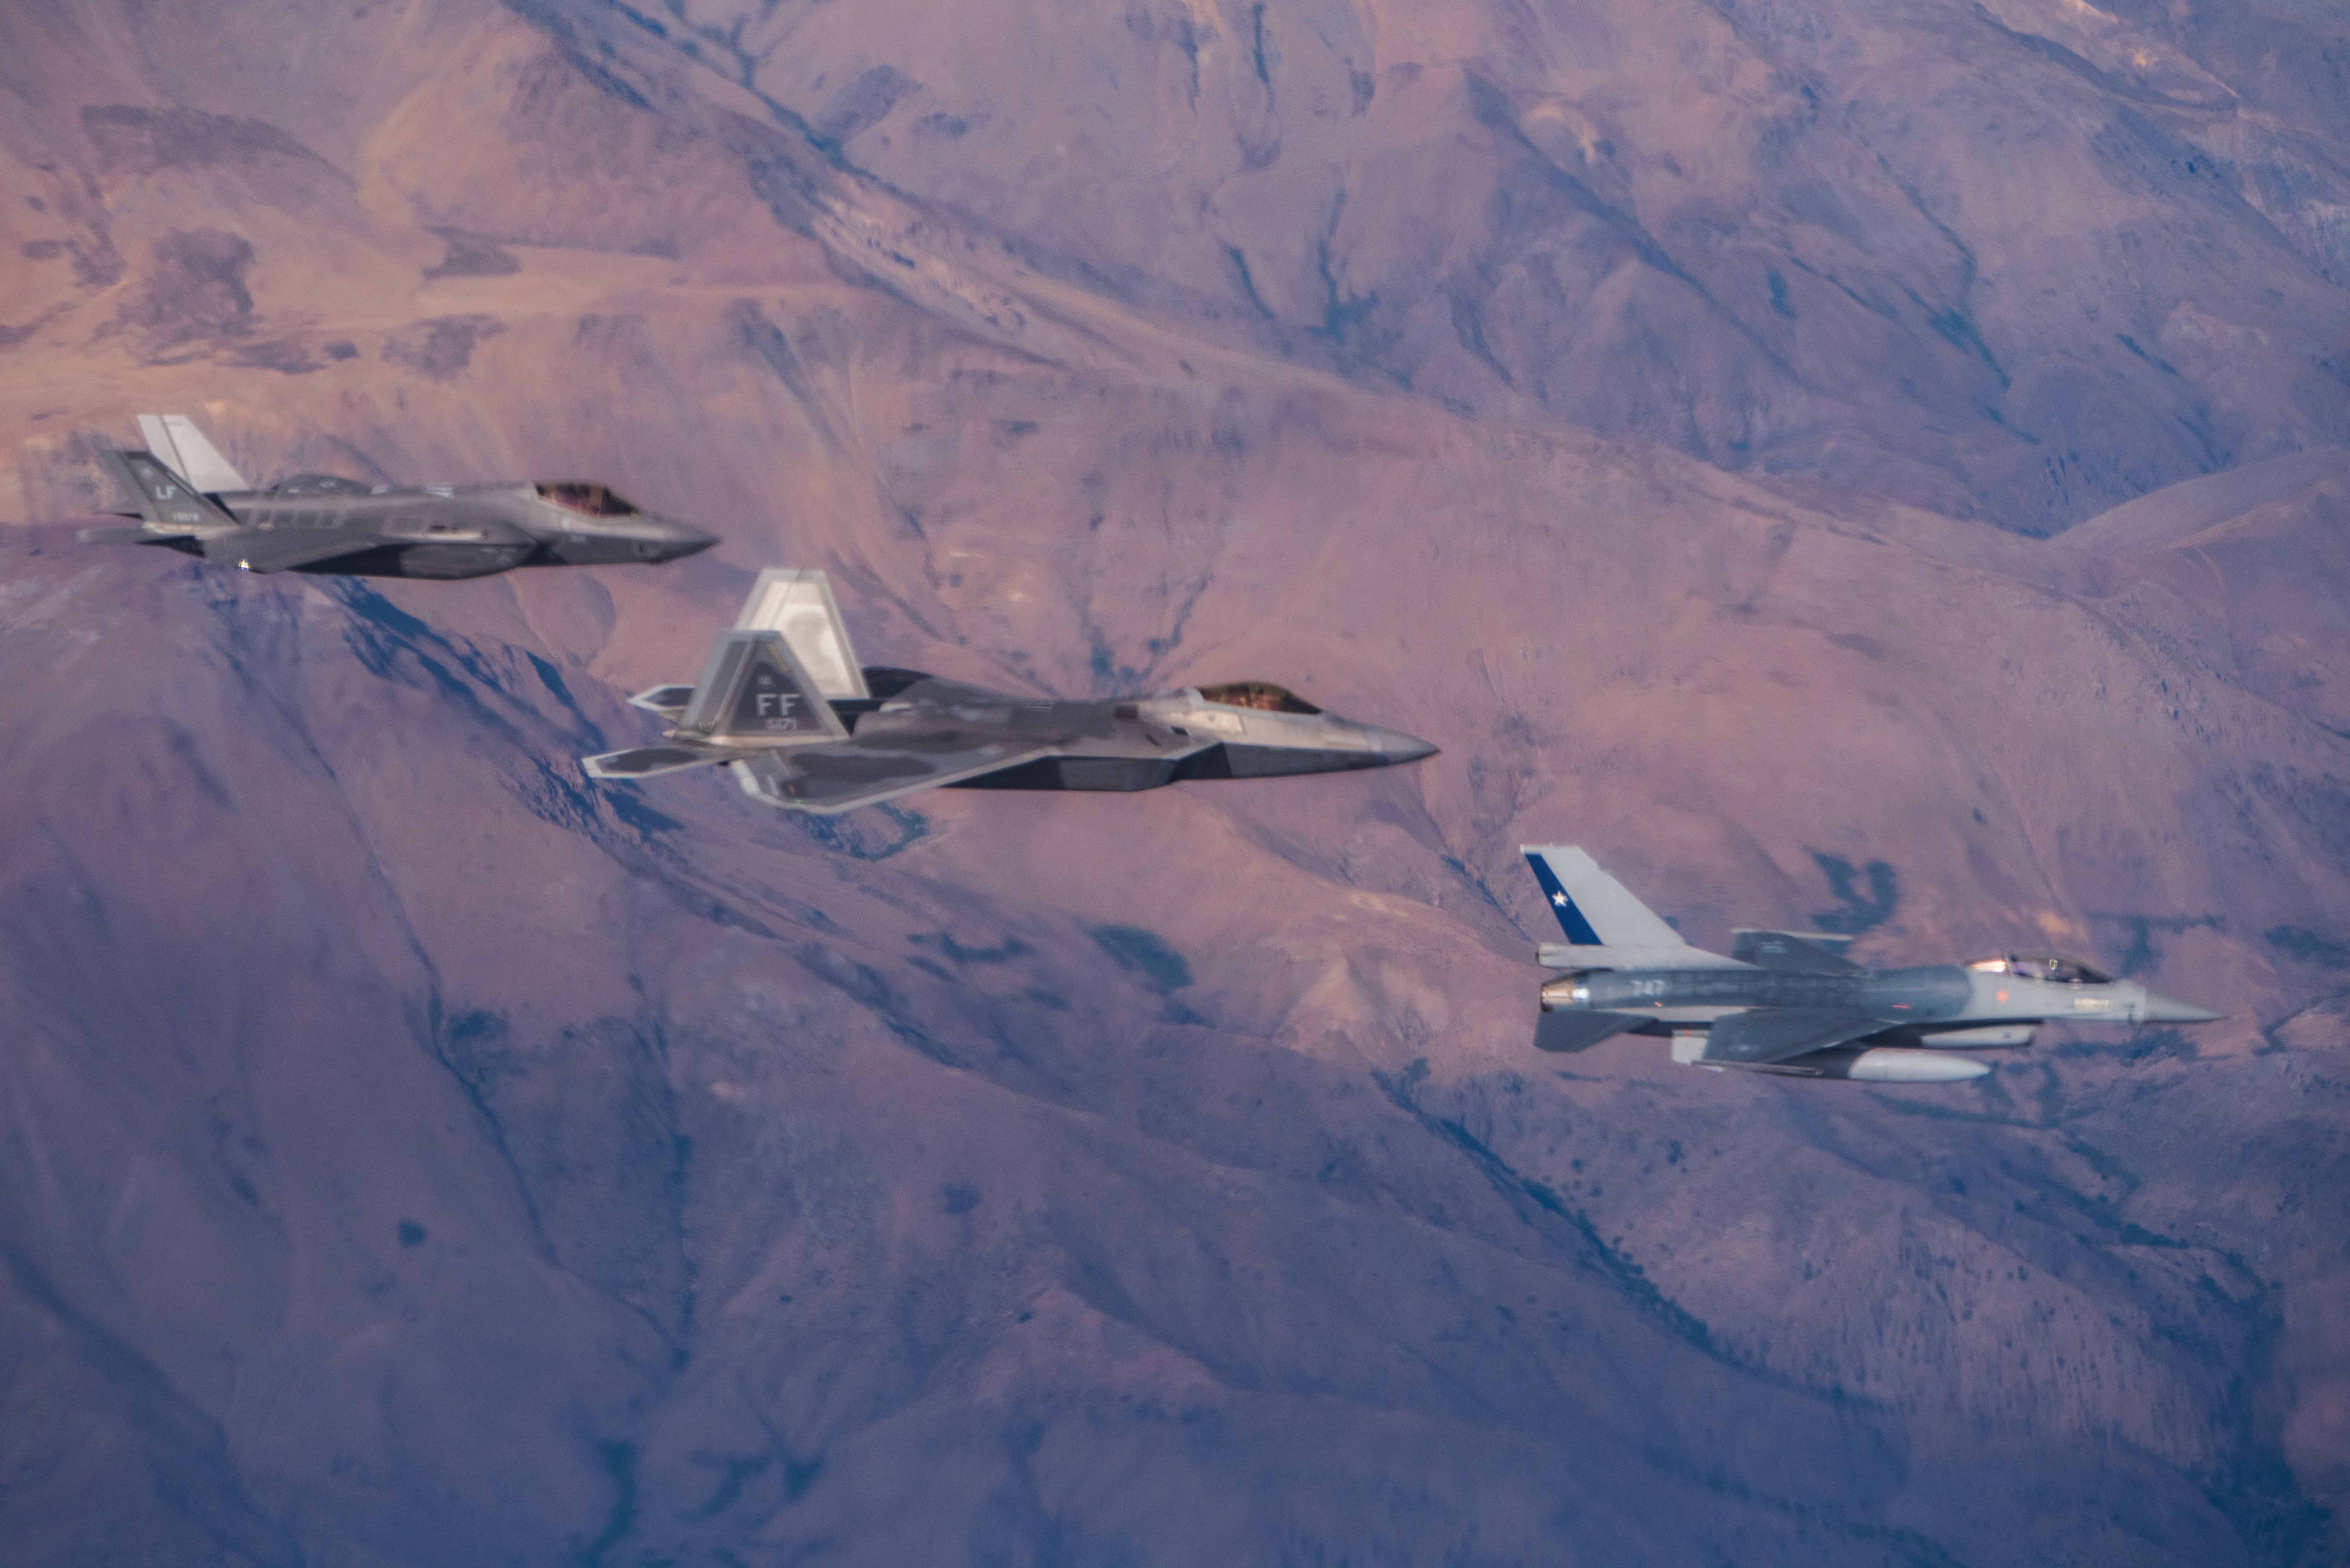 U.S. Air Force, Space Force Take Part in FIDAE 2022 Trade and Air Show in  Chile > U.S. Southern Command > News